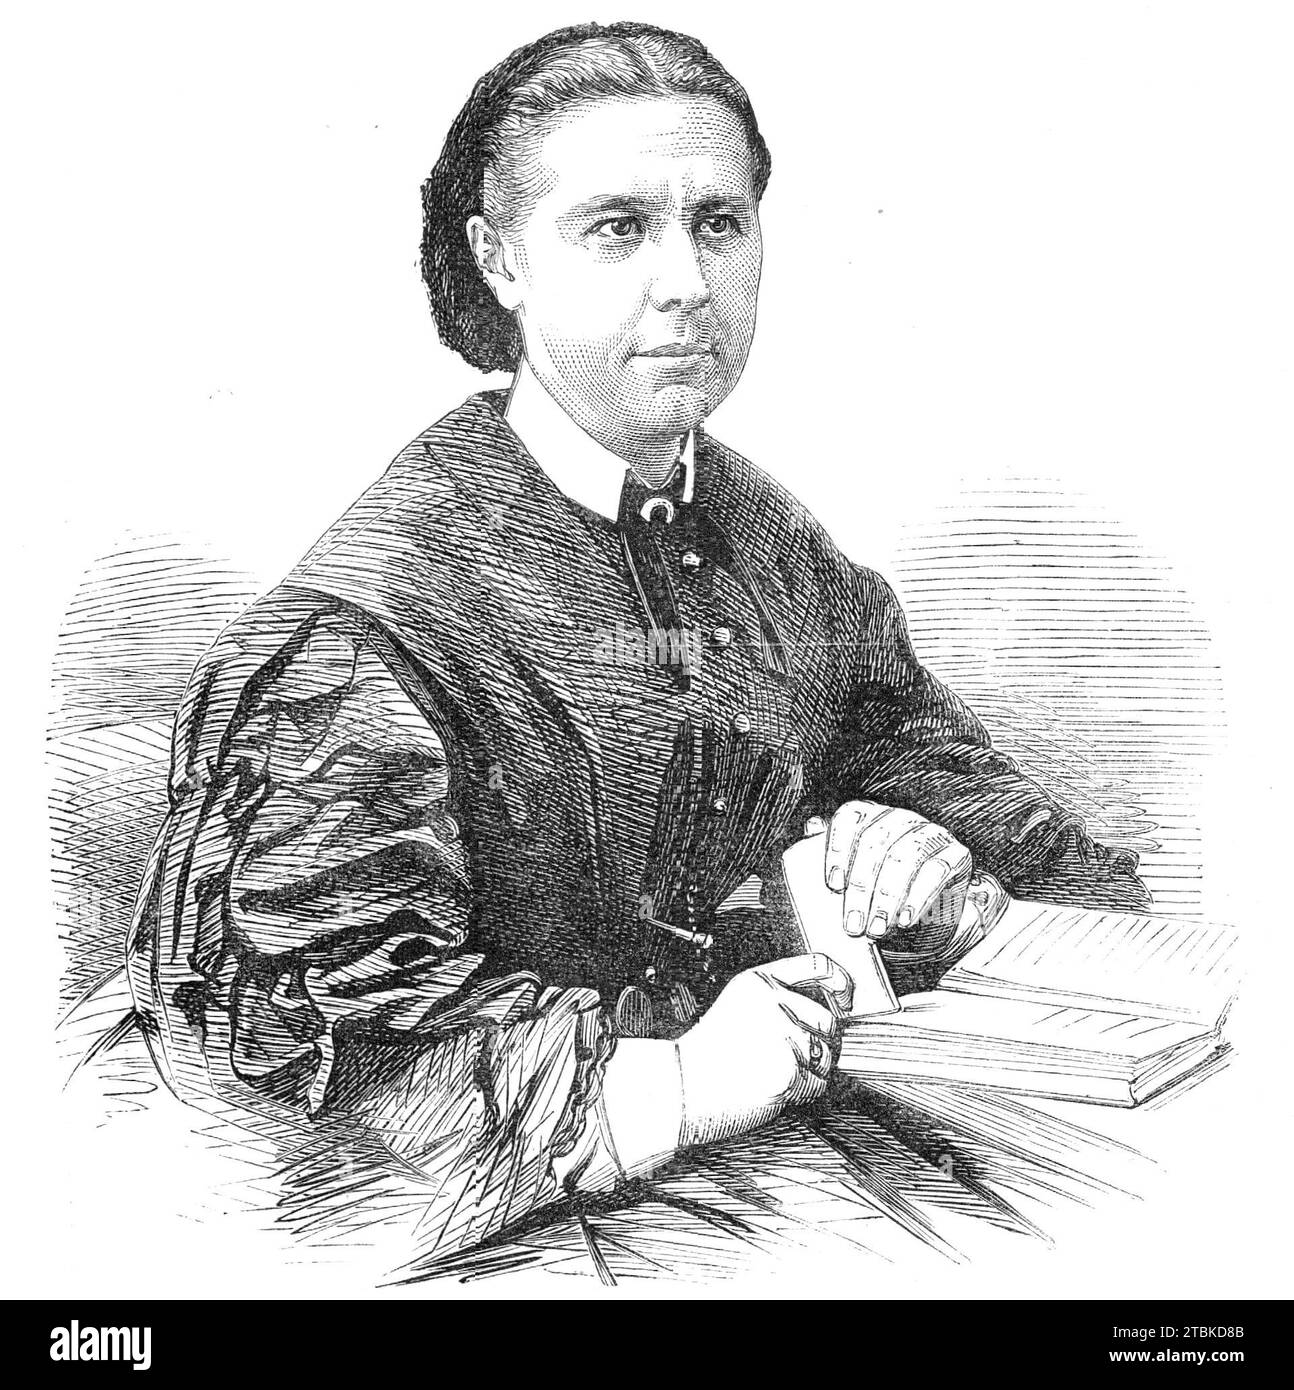 Miss Emily Faithfull, 1861. Engraving from a photograph by Herbert Watkins of the secretary of the Society for Promoting the Employment of Women. A committee was set up to report on the best way to increase the industrial employment of women. Faithfull  '...established a printing-press for the employment of women in Great Coram-street...The advocates of the &quot;family principle&quot; contended that the proper sphere of woman's usefulness was her home, and that her duty was the ministration to the comfort of husband and children...[however] the objectors were silenced...and...her Majesty sign Stock Photo